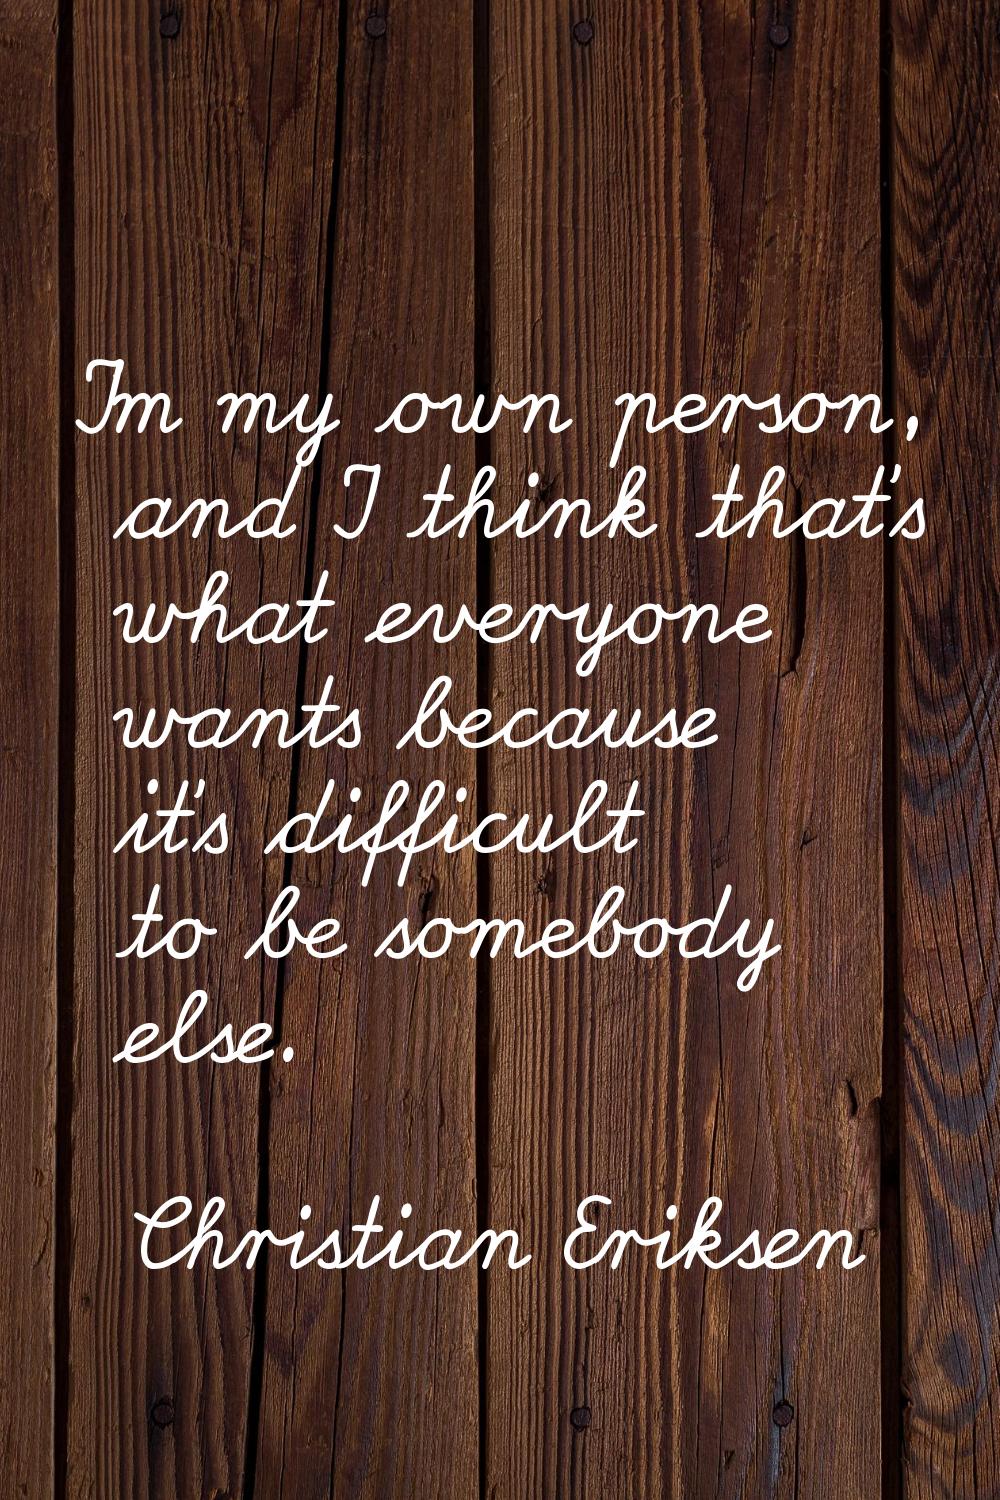 I'm my own person, and I think that's what everyone wants because it's difficult to be somebody els